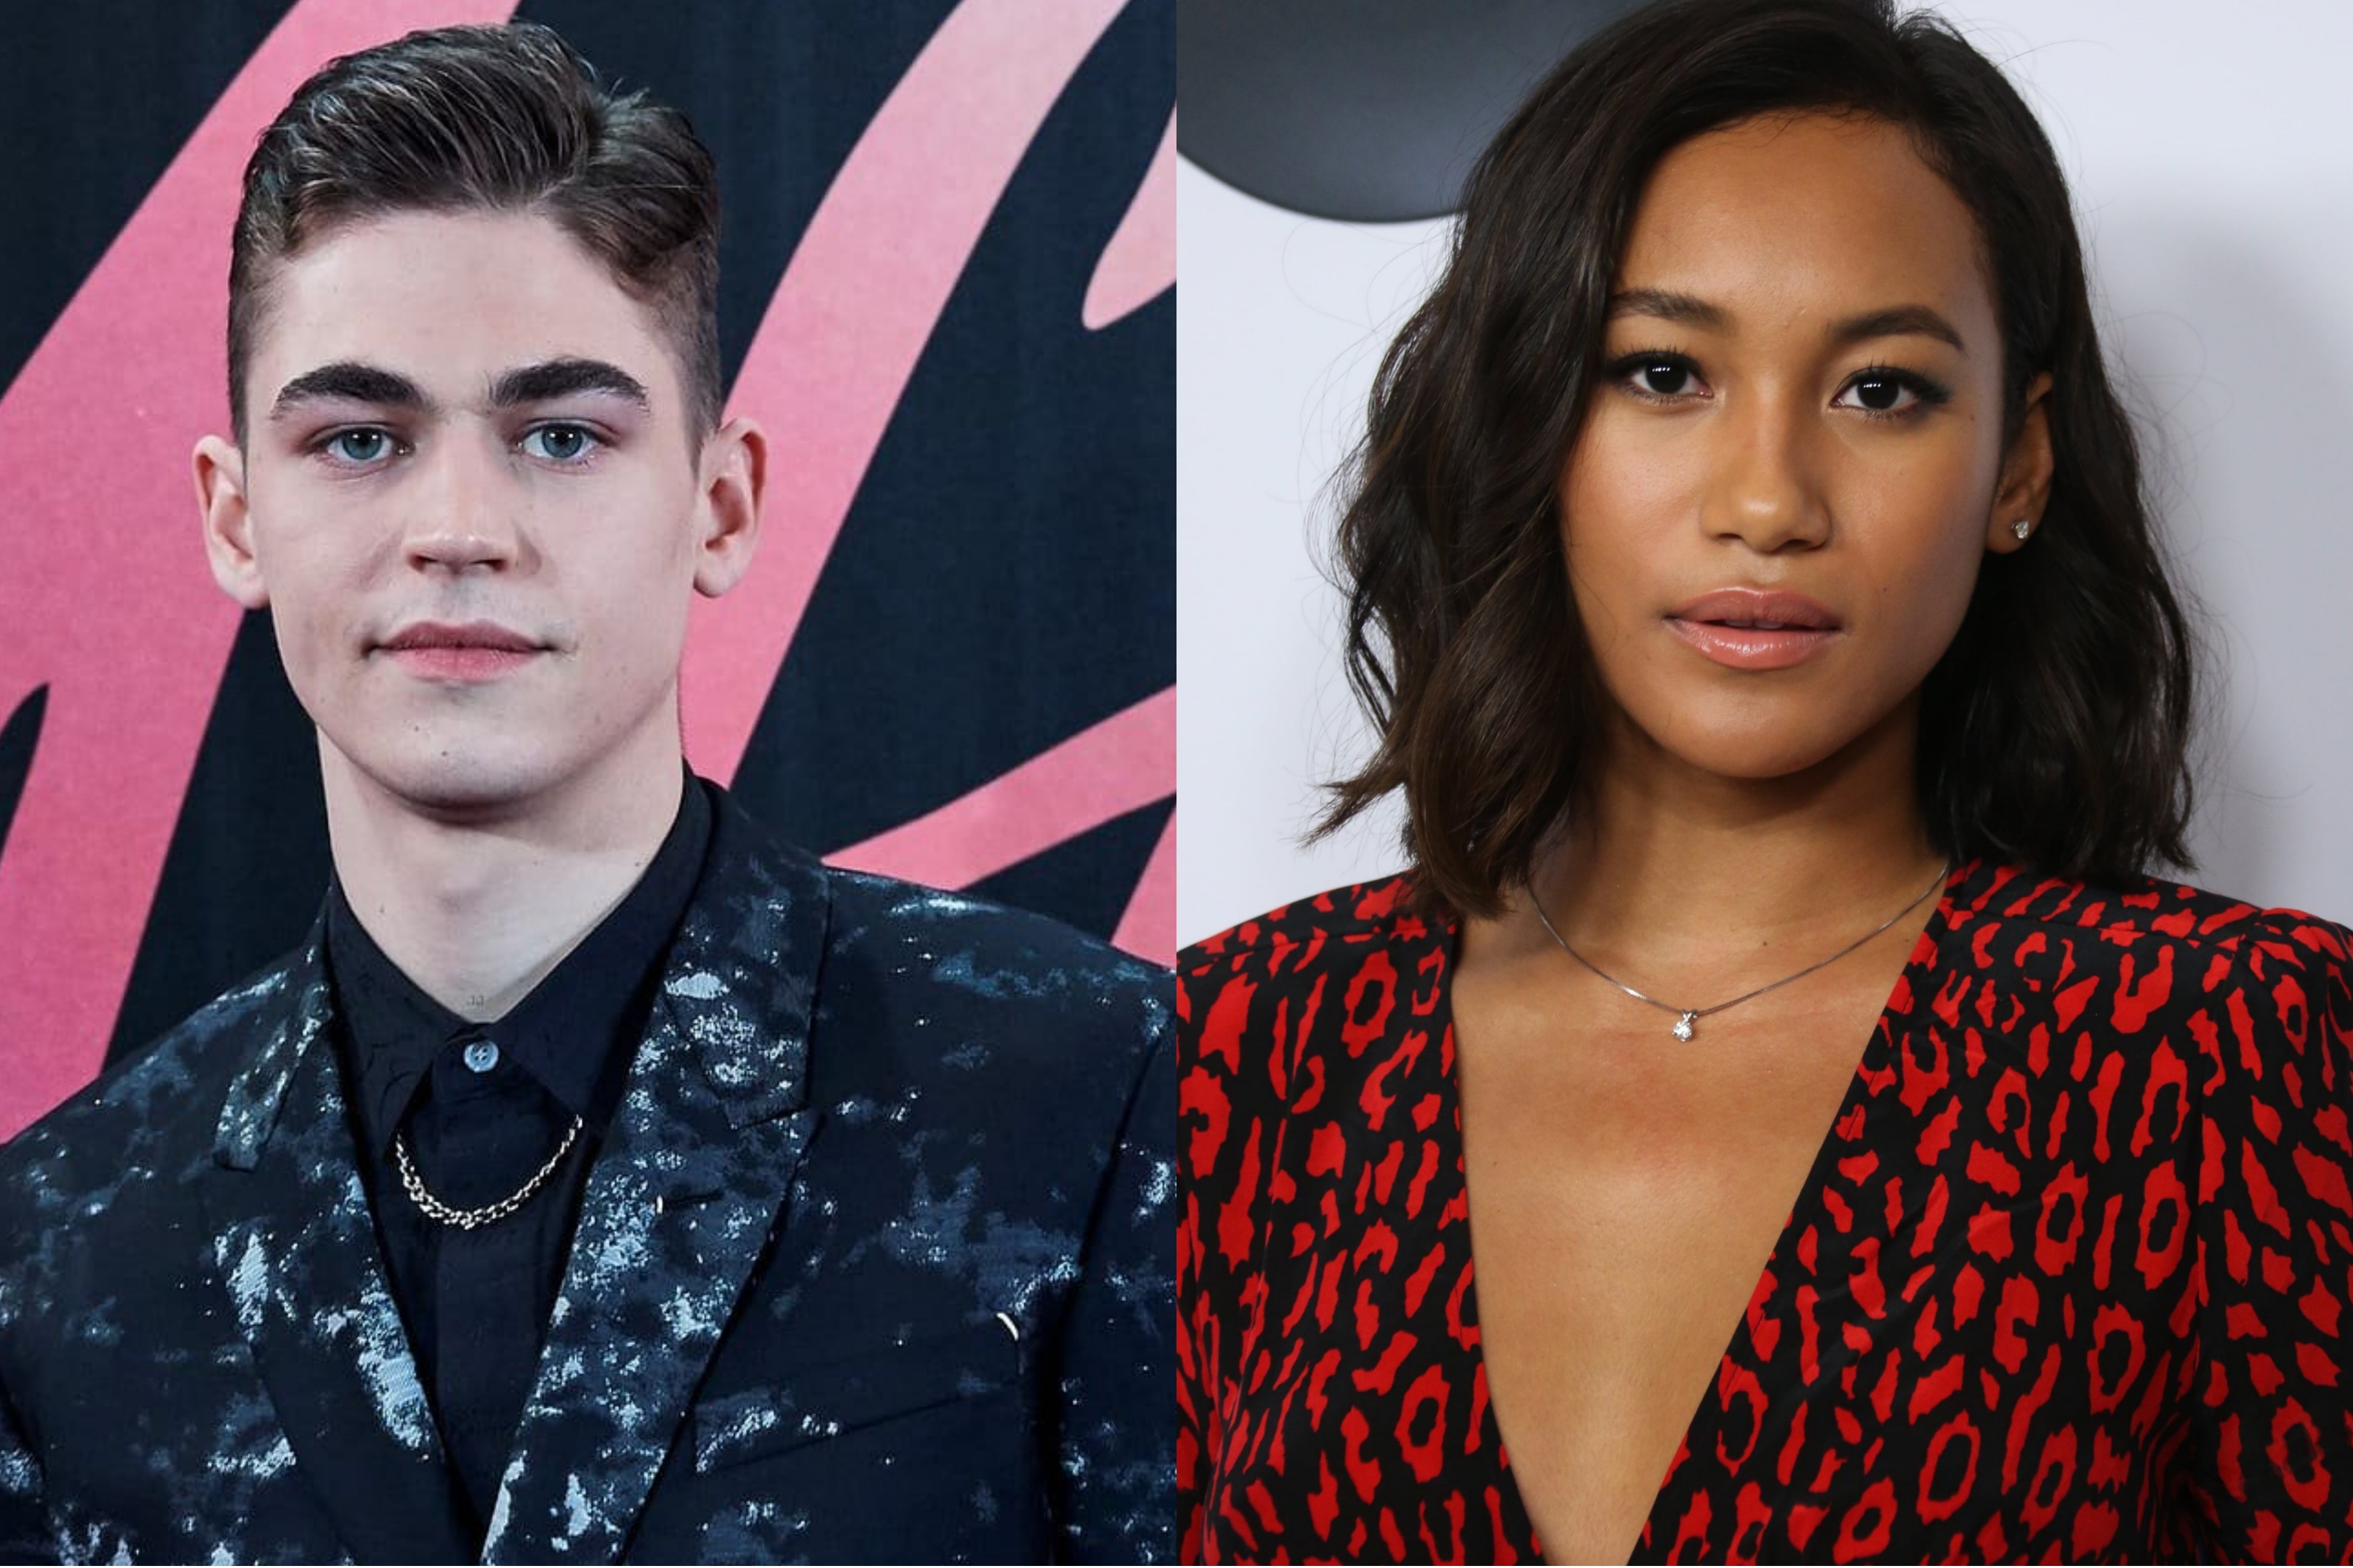 Hero Fiennes Tiffin Set To Star In 'First Love' With Sydney Park ...